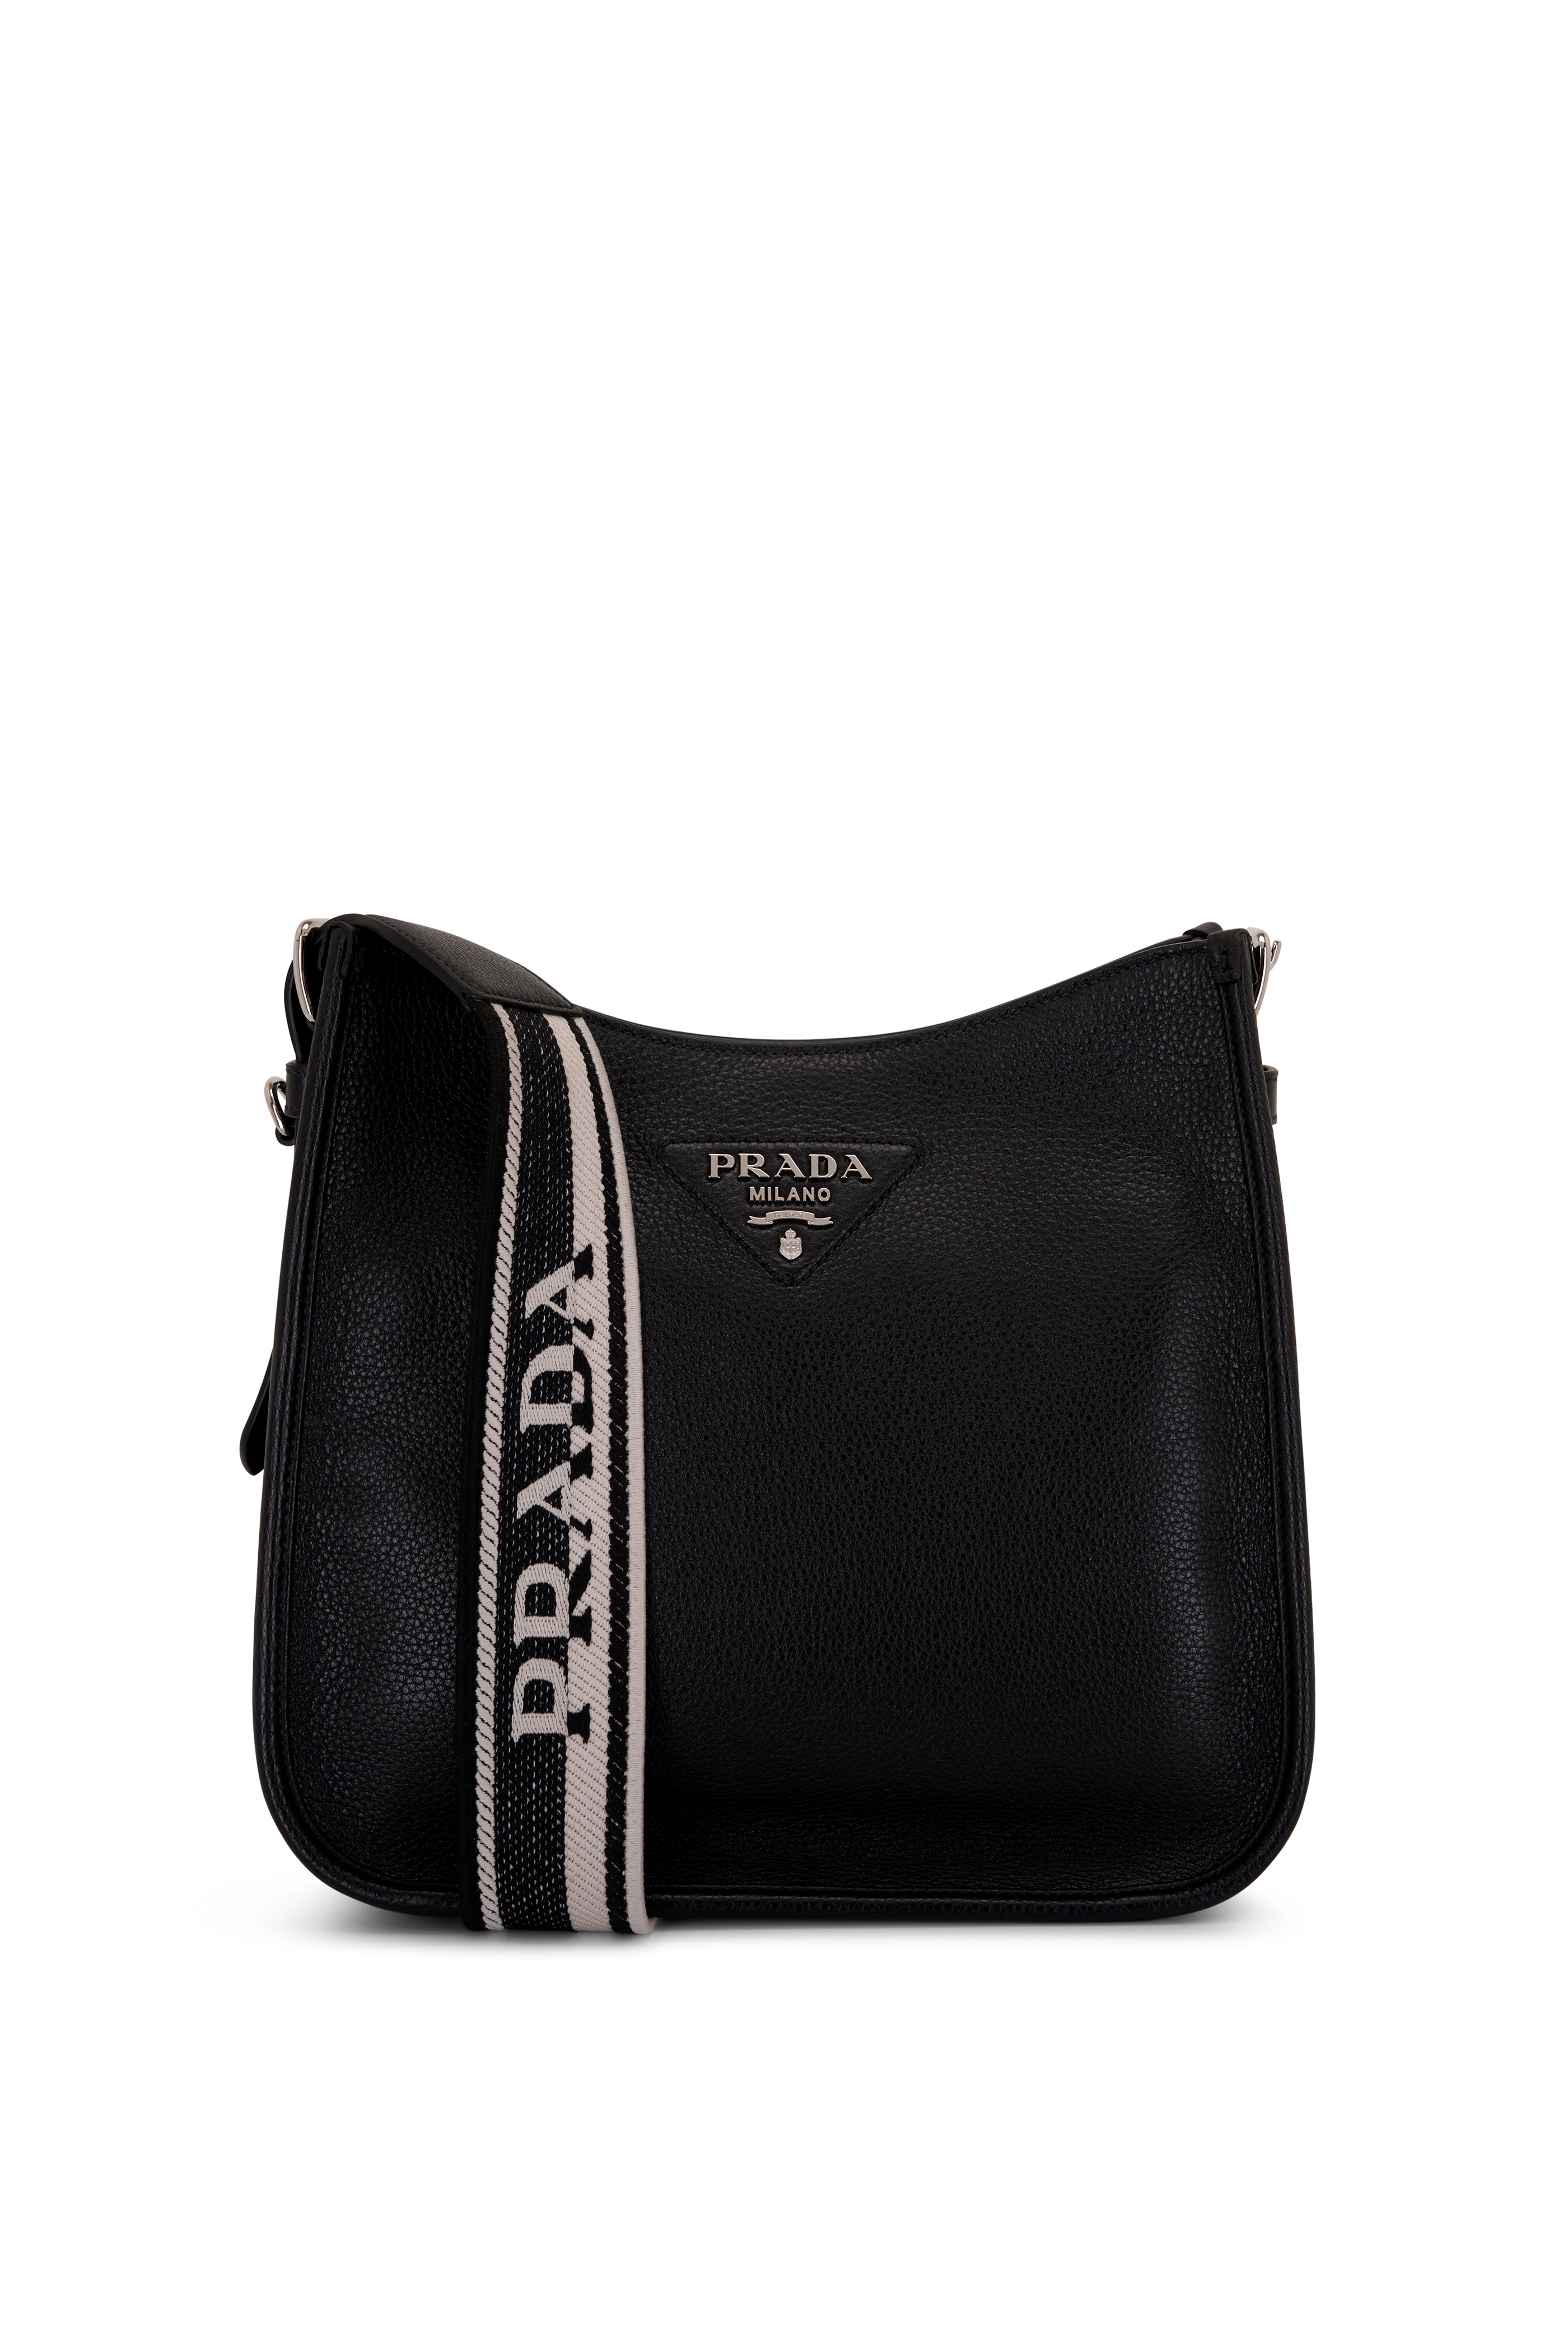 Prada Women's Re-Edition Padded Black Nappa Shoulder Bag | by Mitchell Stores